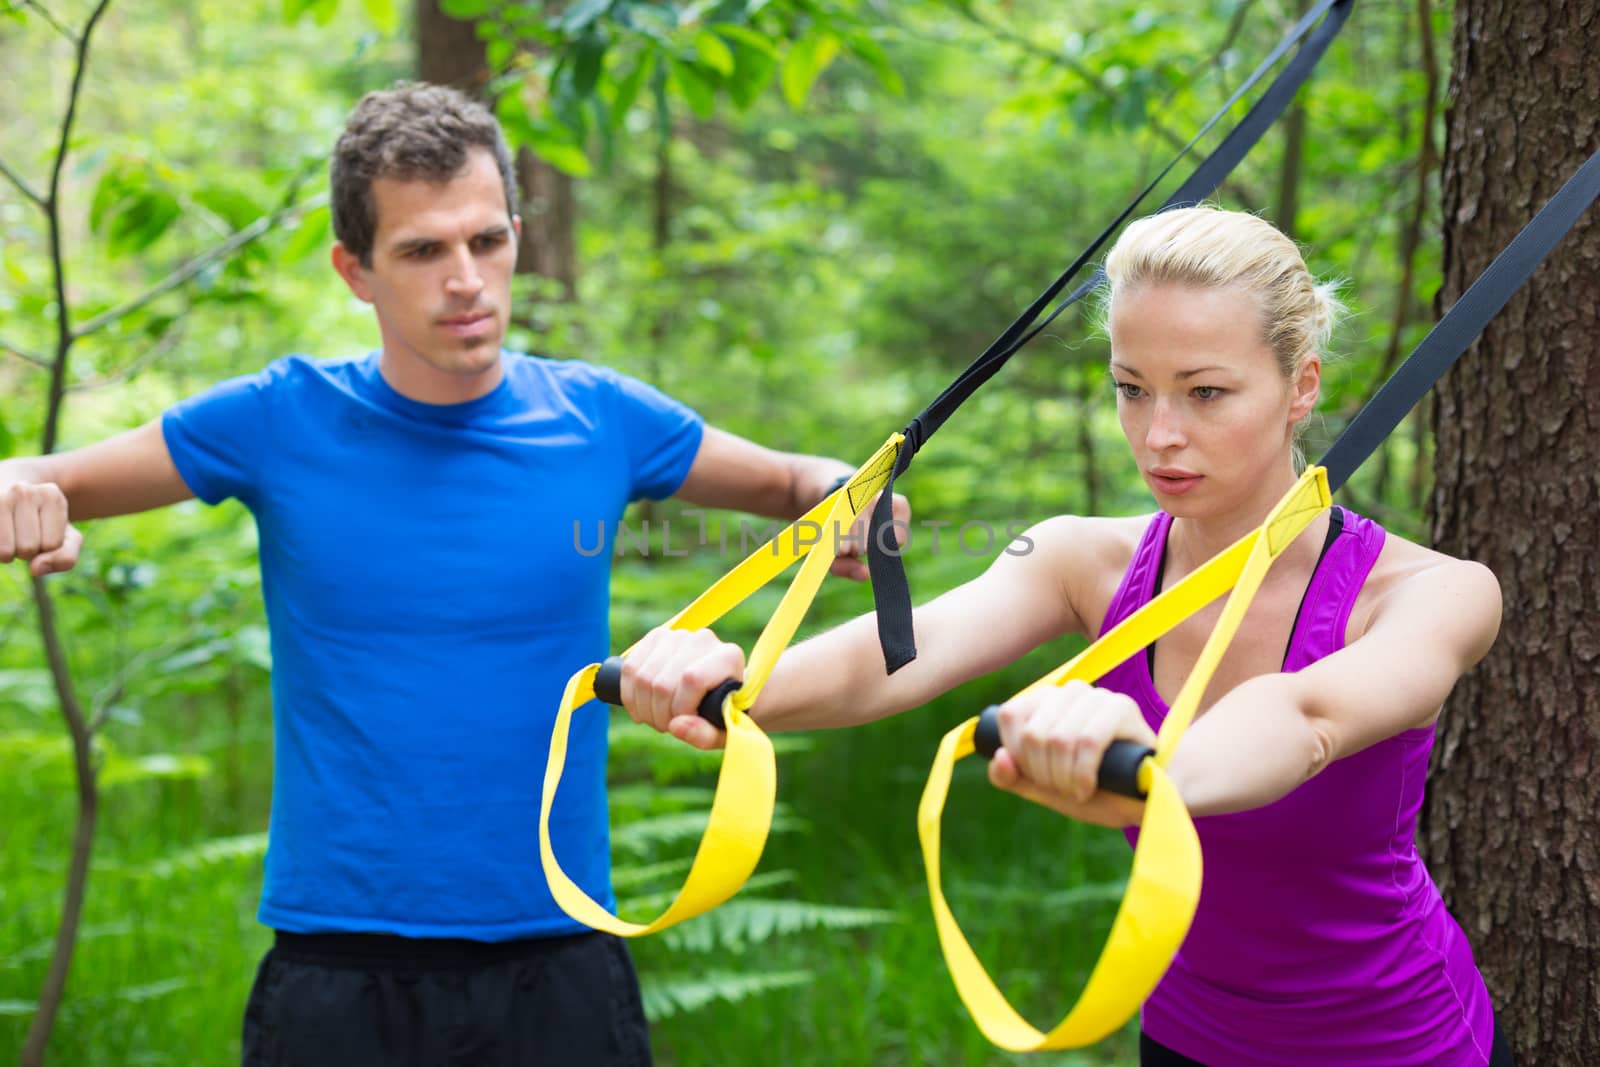 Young active people does suspension training with fitness straps outdoors in the nature.